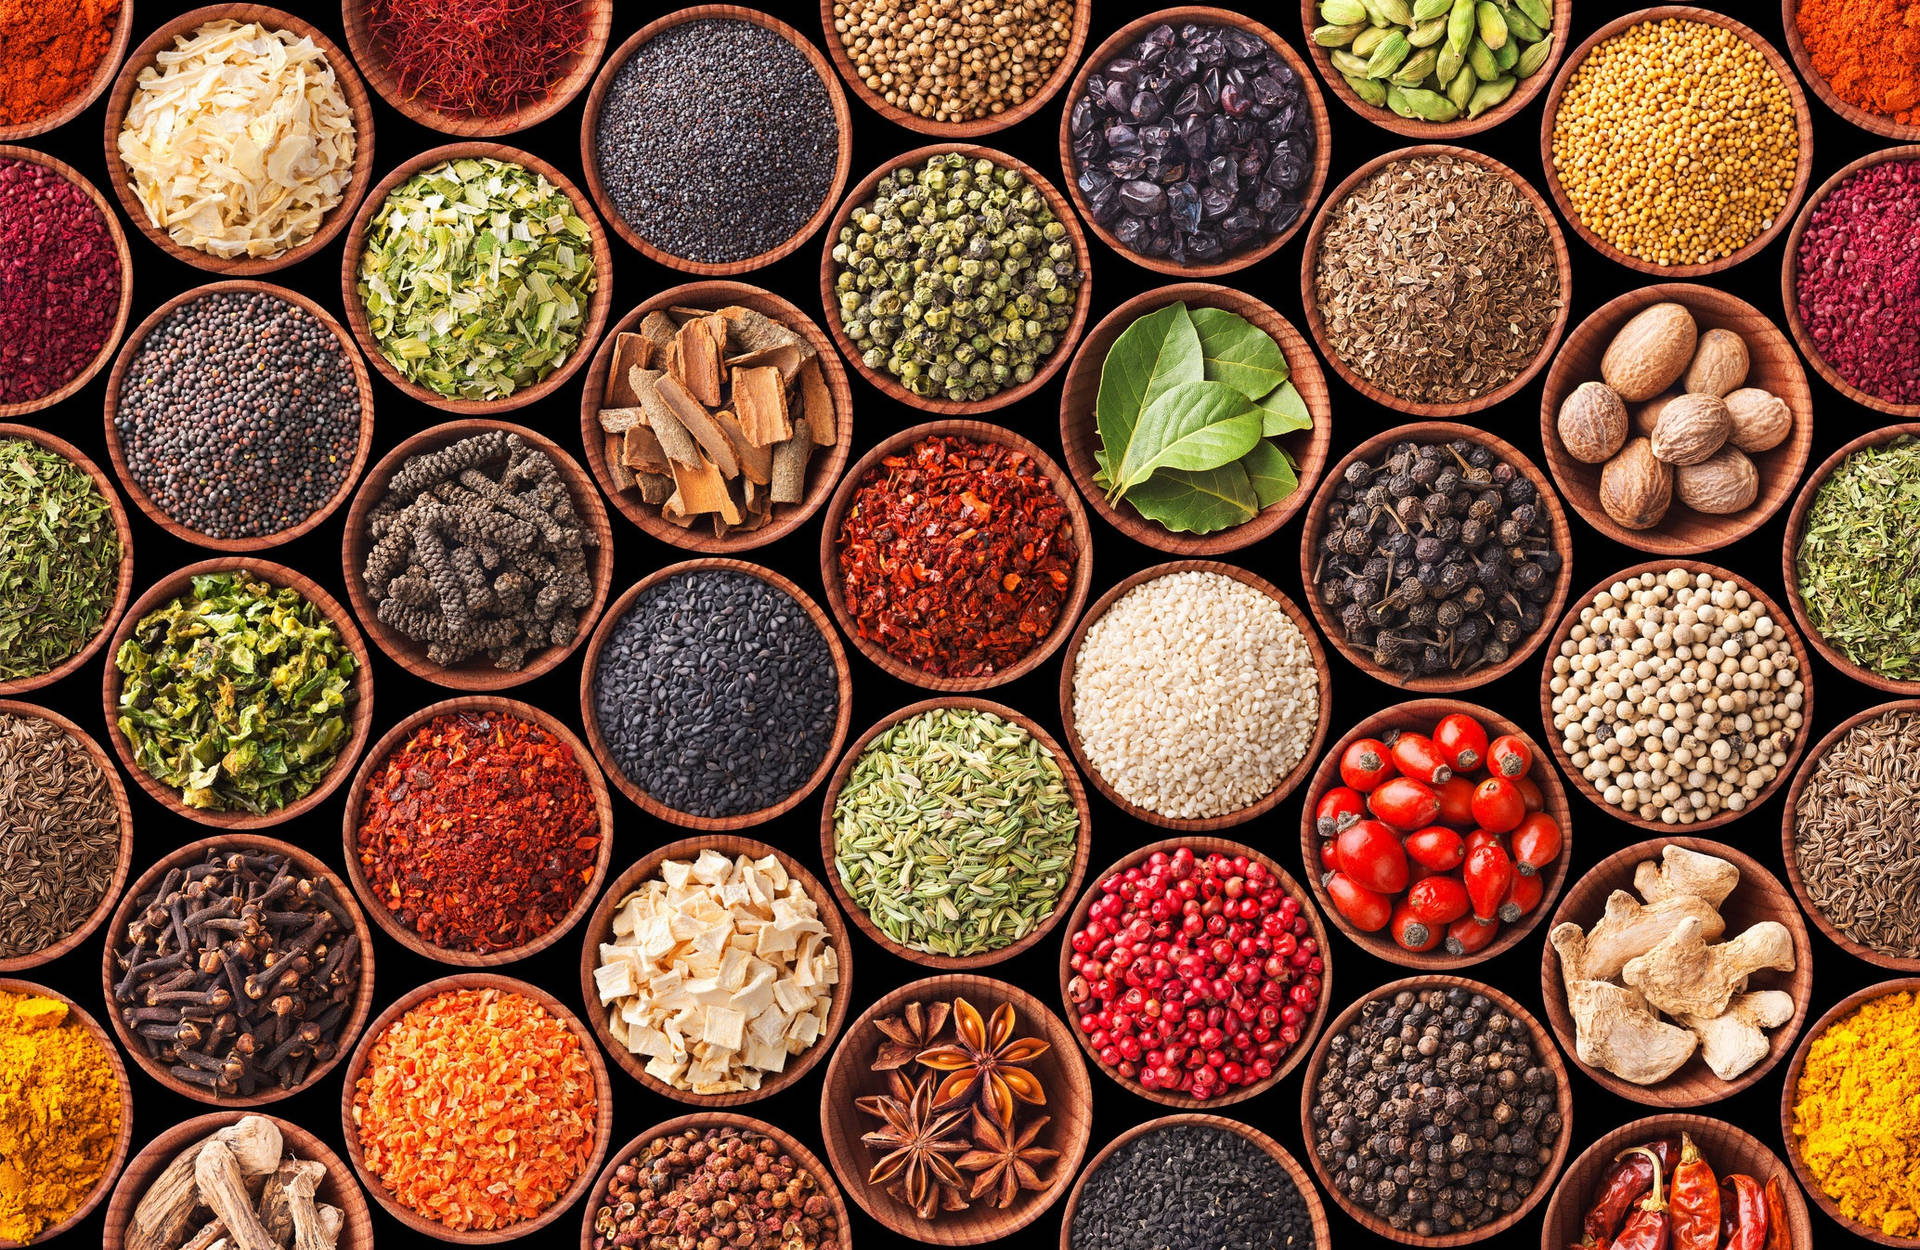 Colorful Spectrum of Spices and Herbs in Bowls Wallpaper